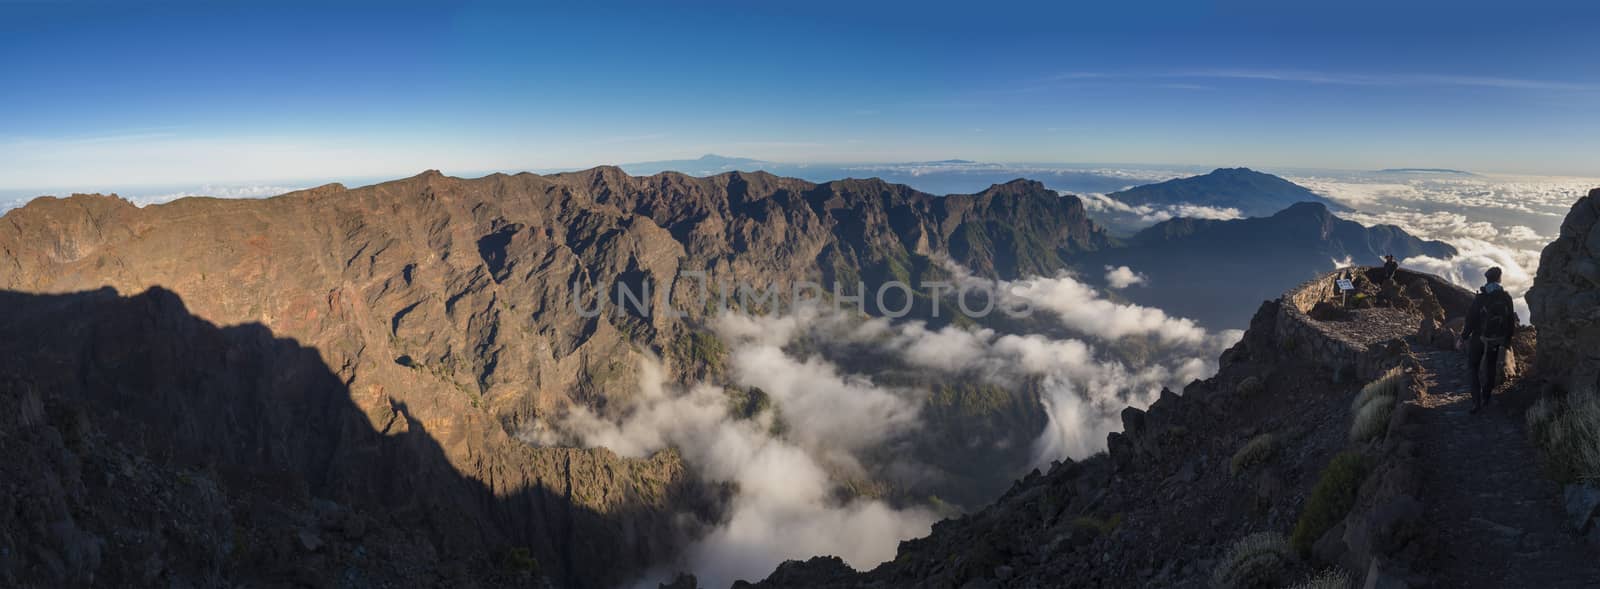 Panoramic view on crater Caldera de Taburiente from viepoint at top of Roque de los Muchachos mountain on the island La Palma, Canary Islands, Spain.